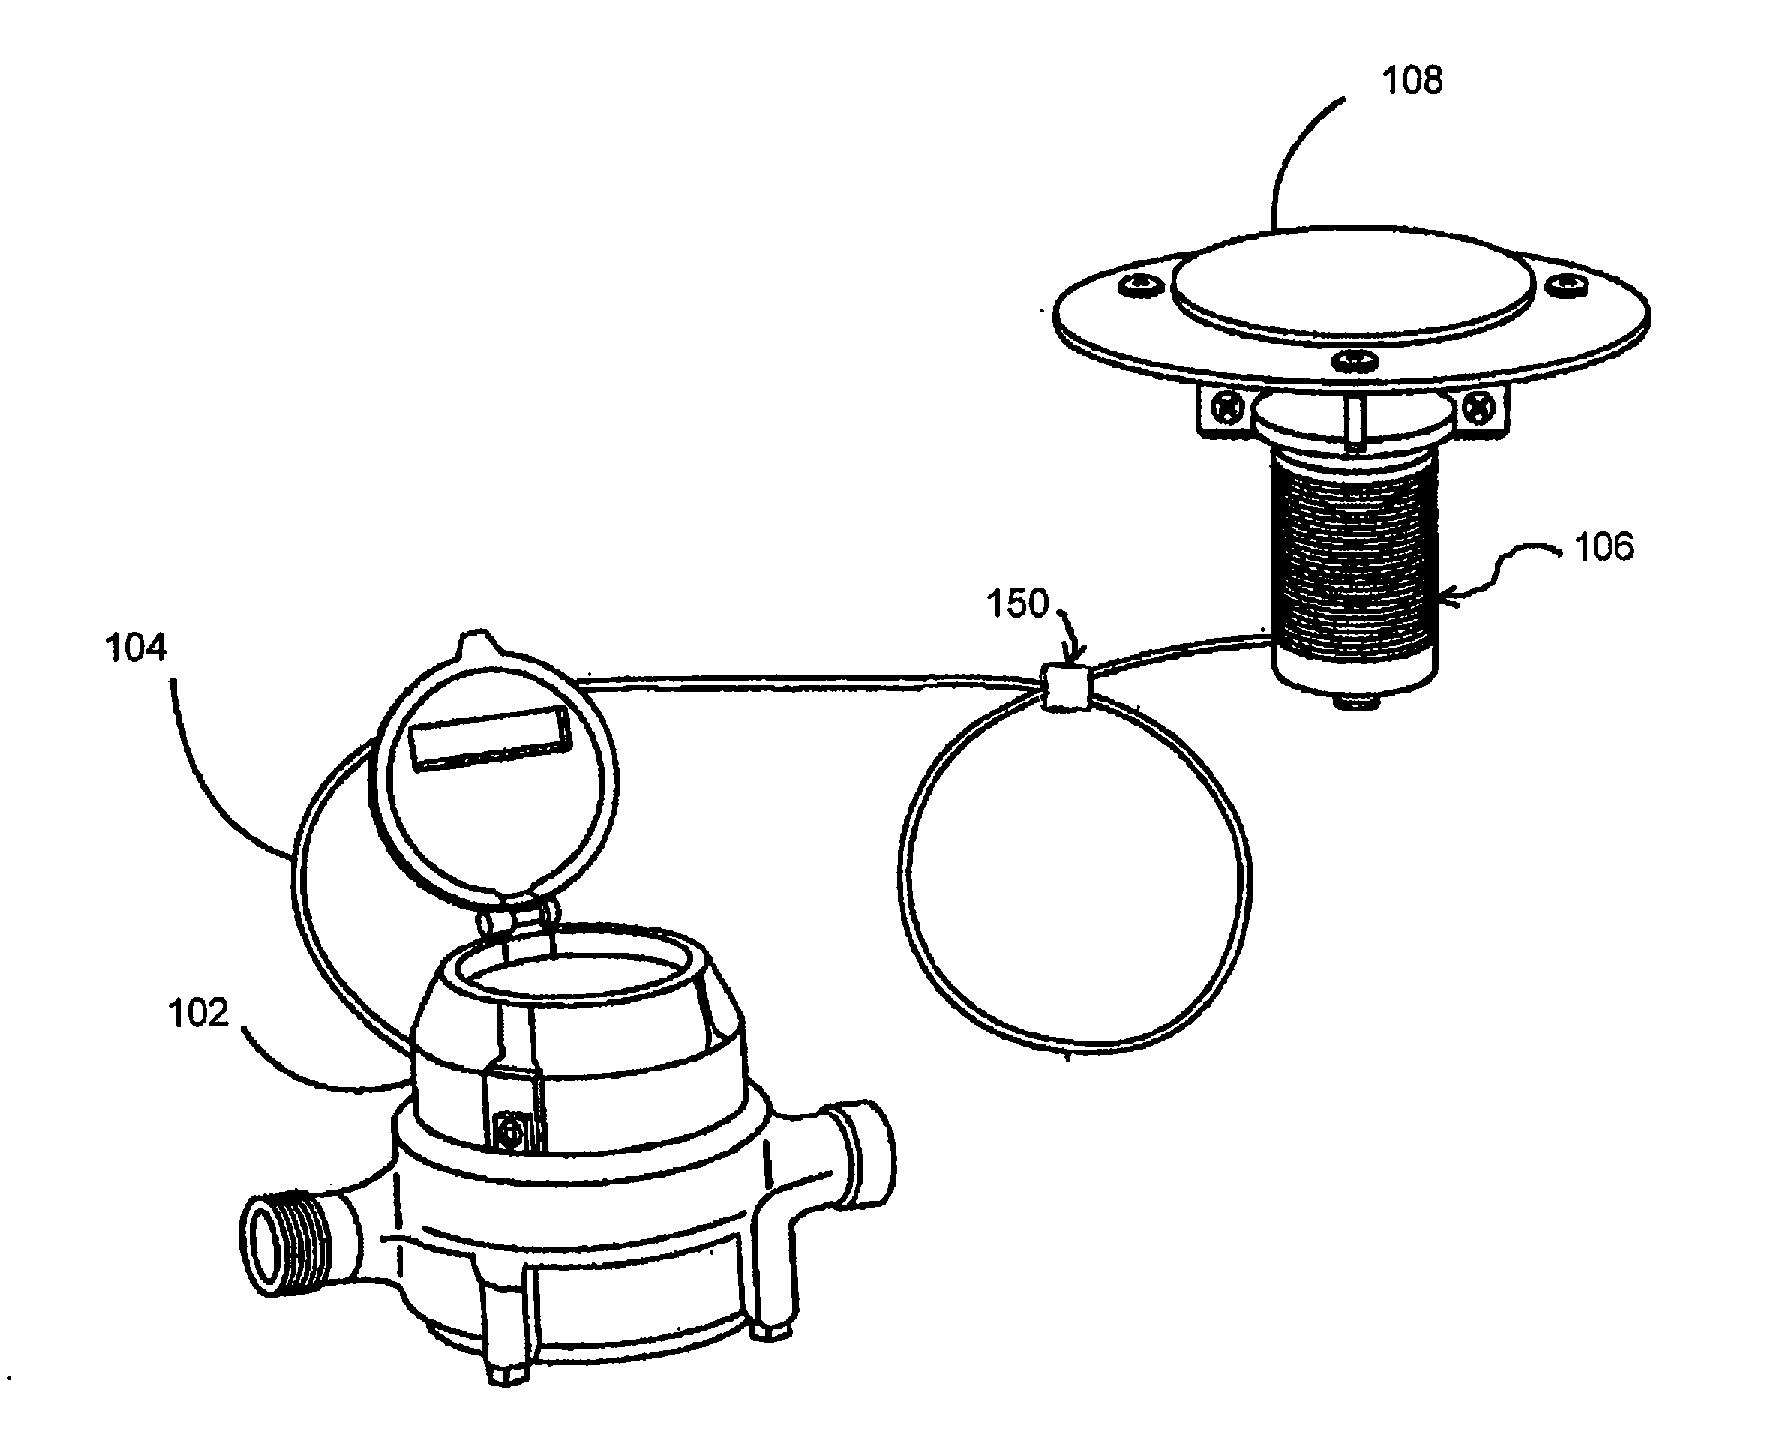 Antenna breakaway device for utility pit meter system